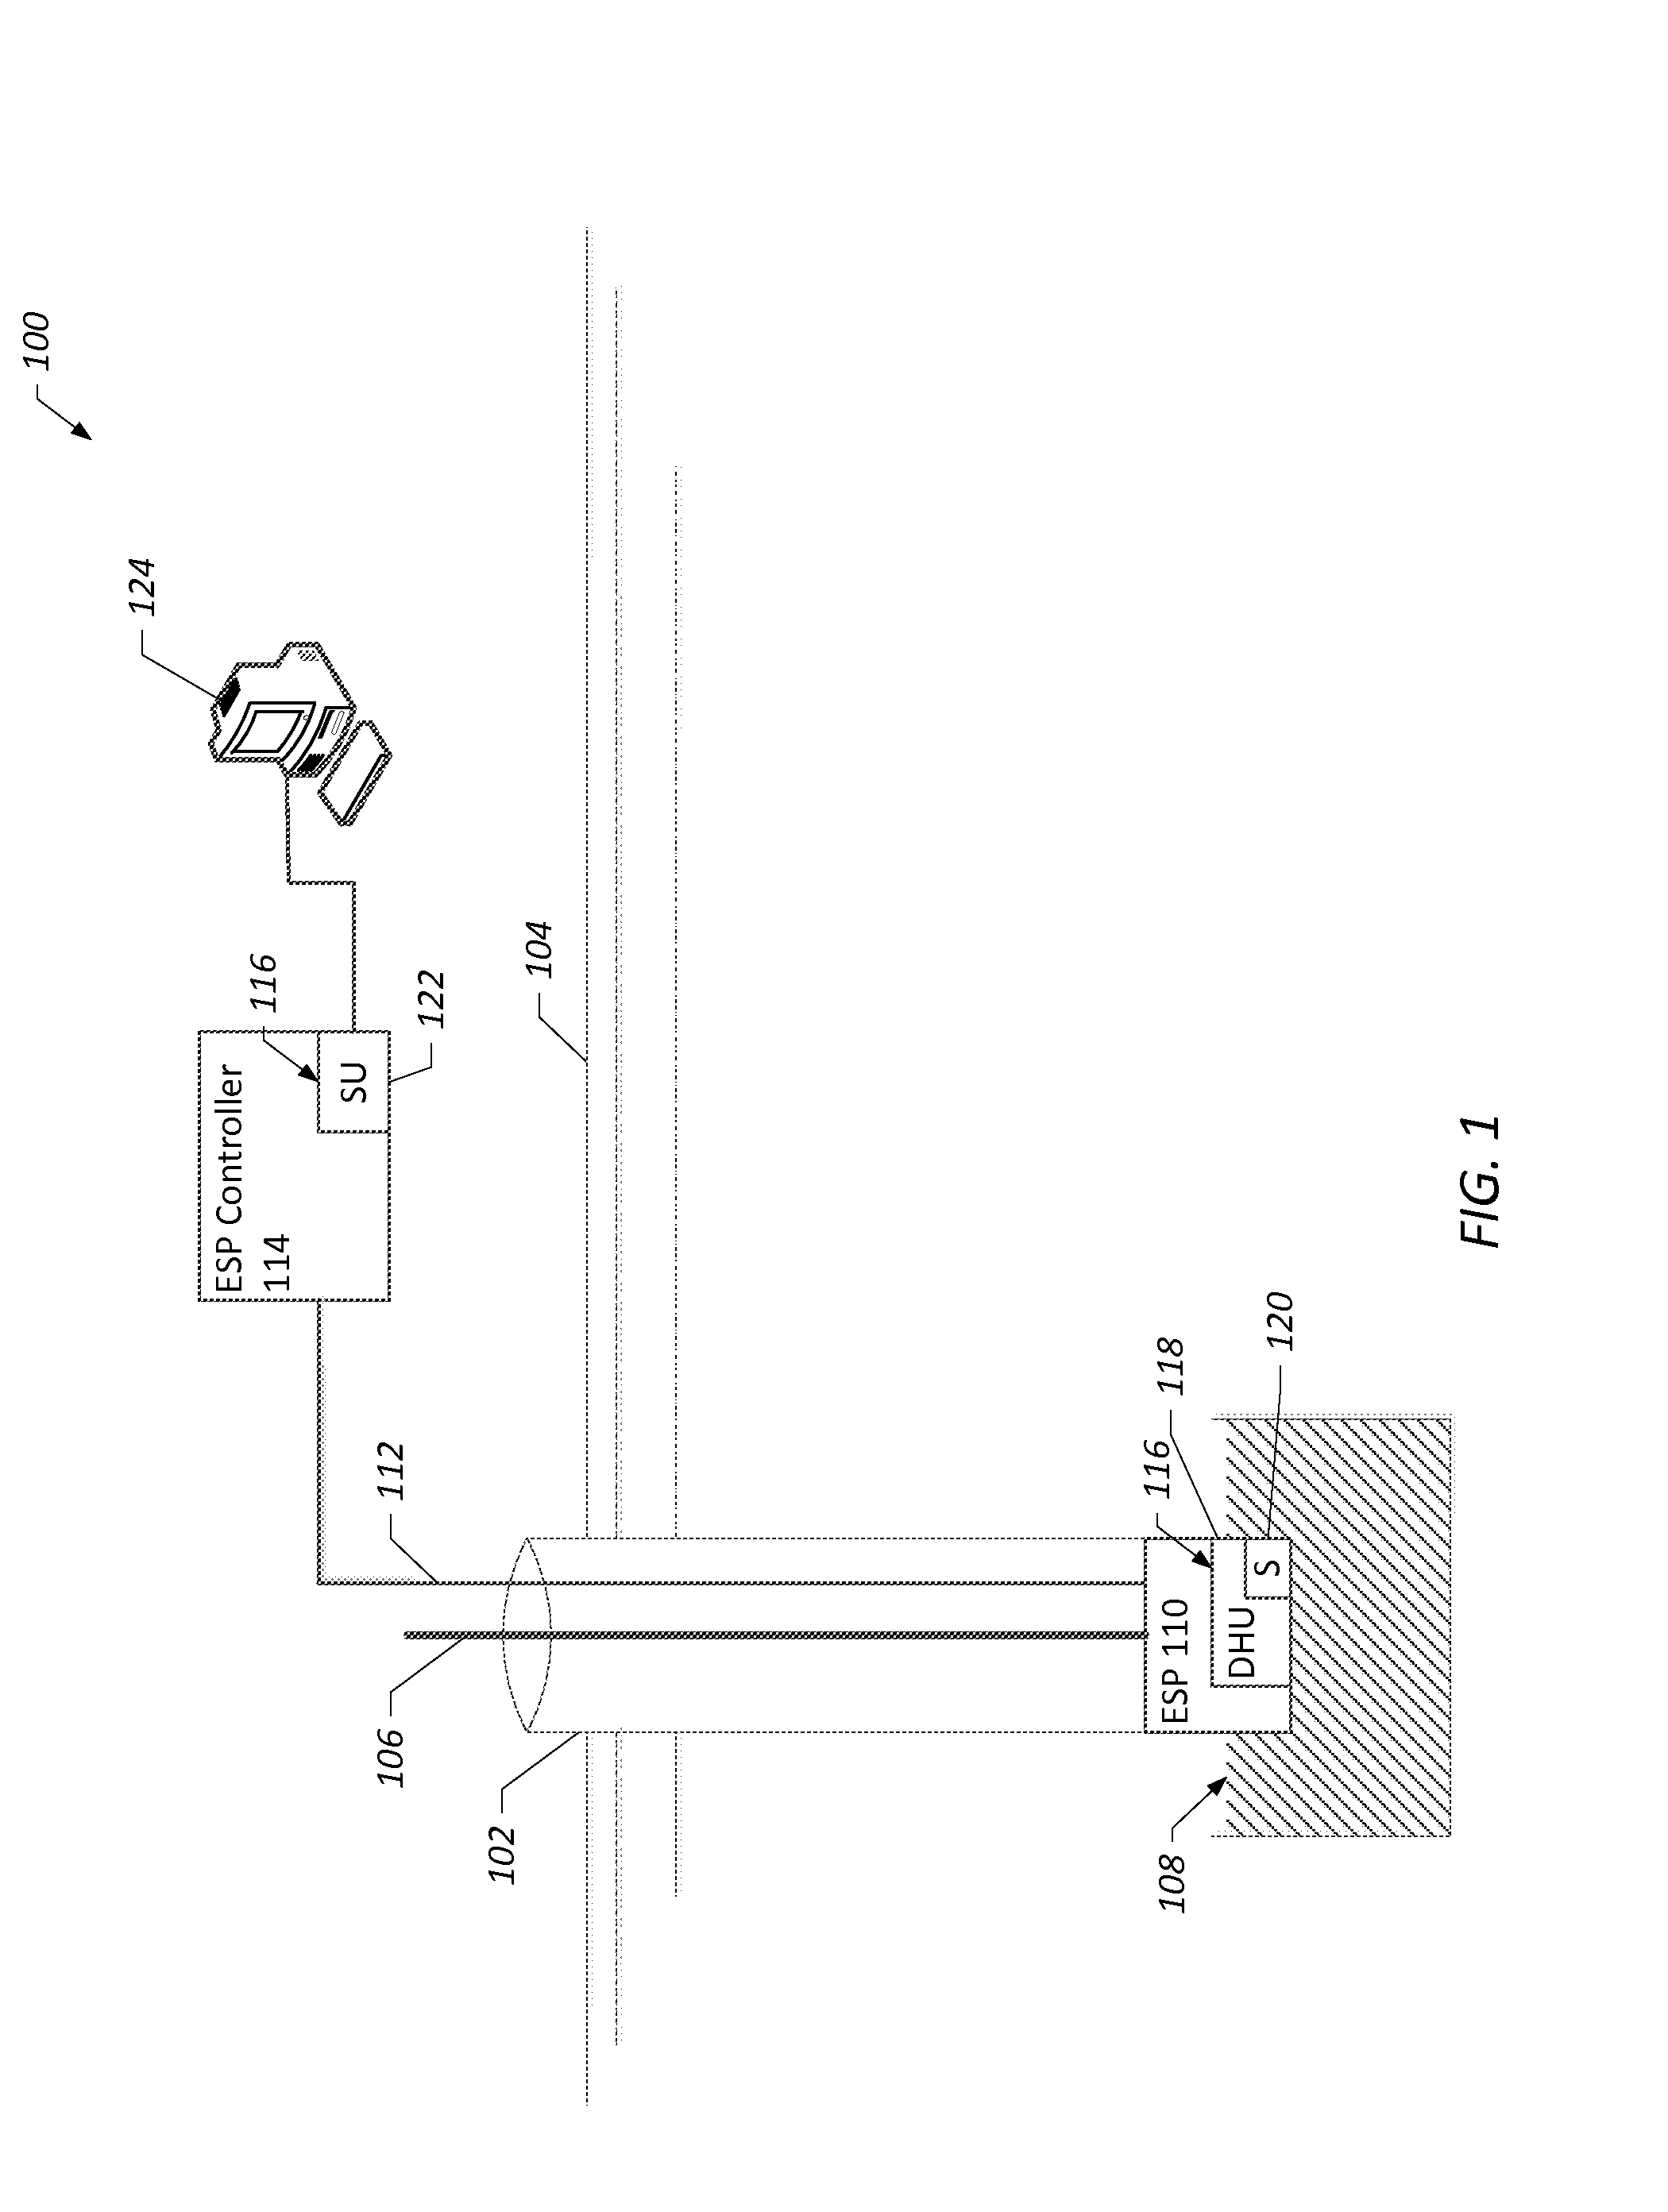 Systems and methods for ground fault immune data measurement systems for electronic submersible pumps